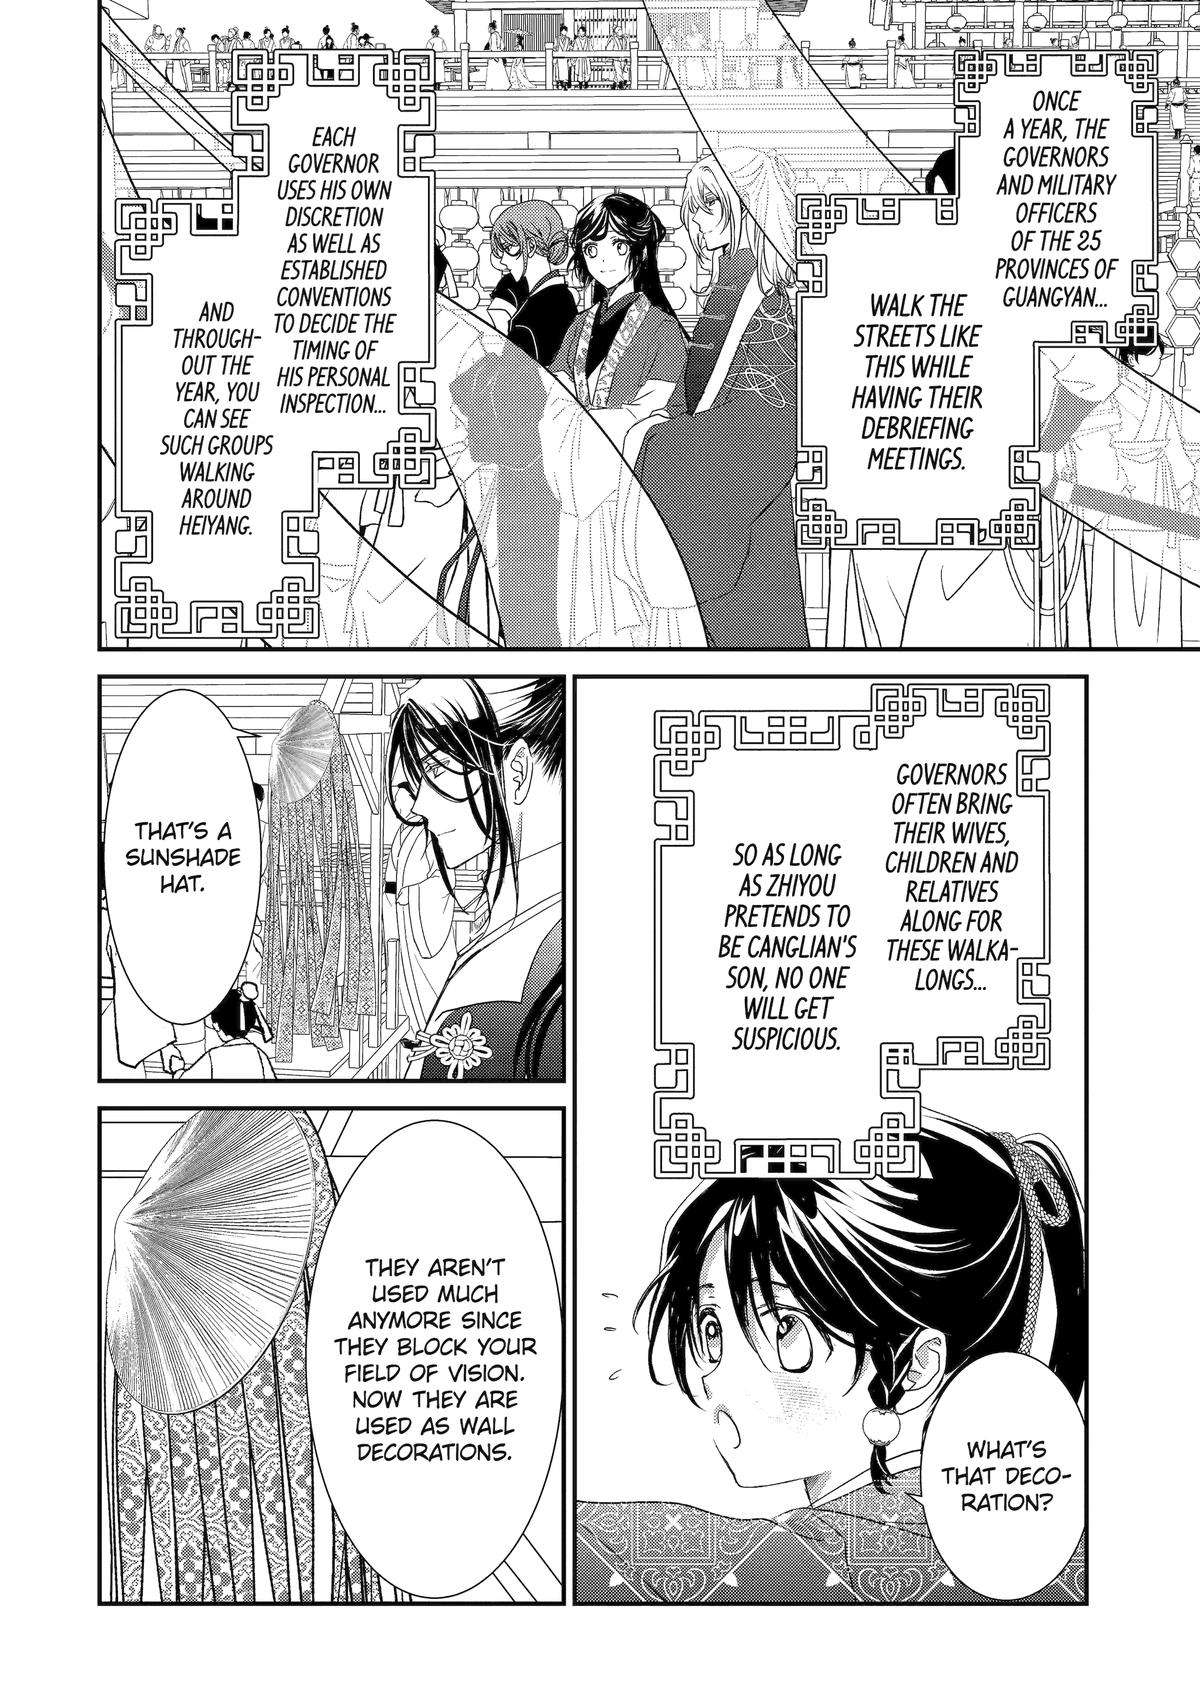 The Emperor's Caretaker: I'm Too Happy Living as a Lady-in-Waiting to Leave the Palace - chapter 21 - #6